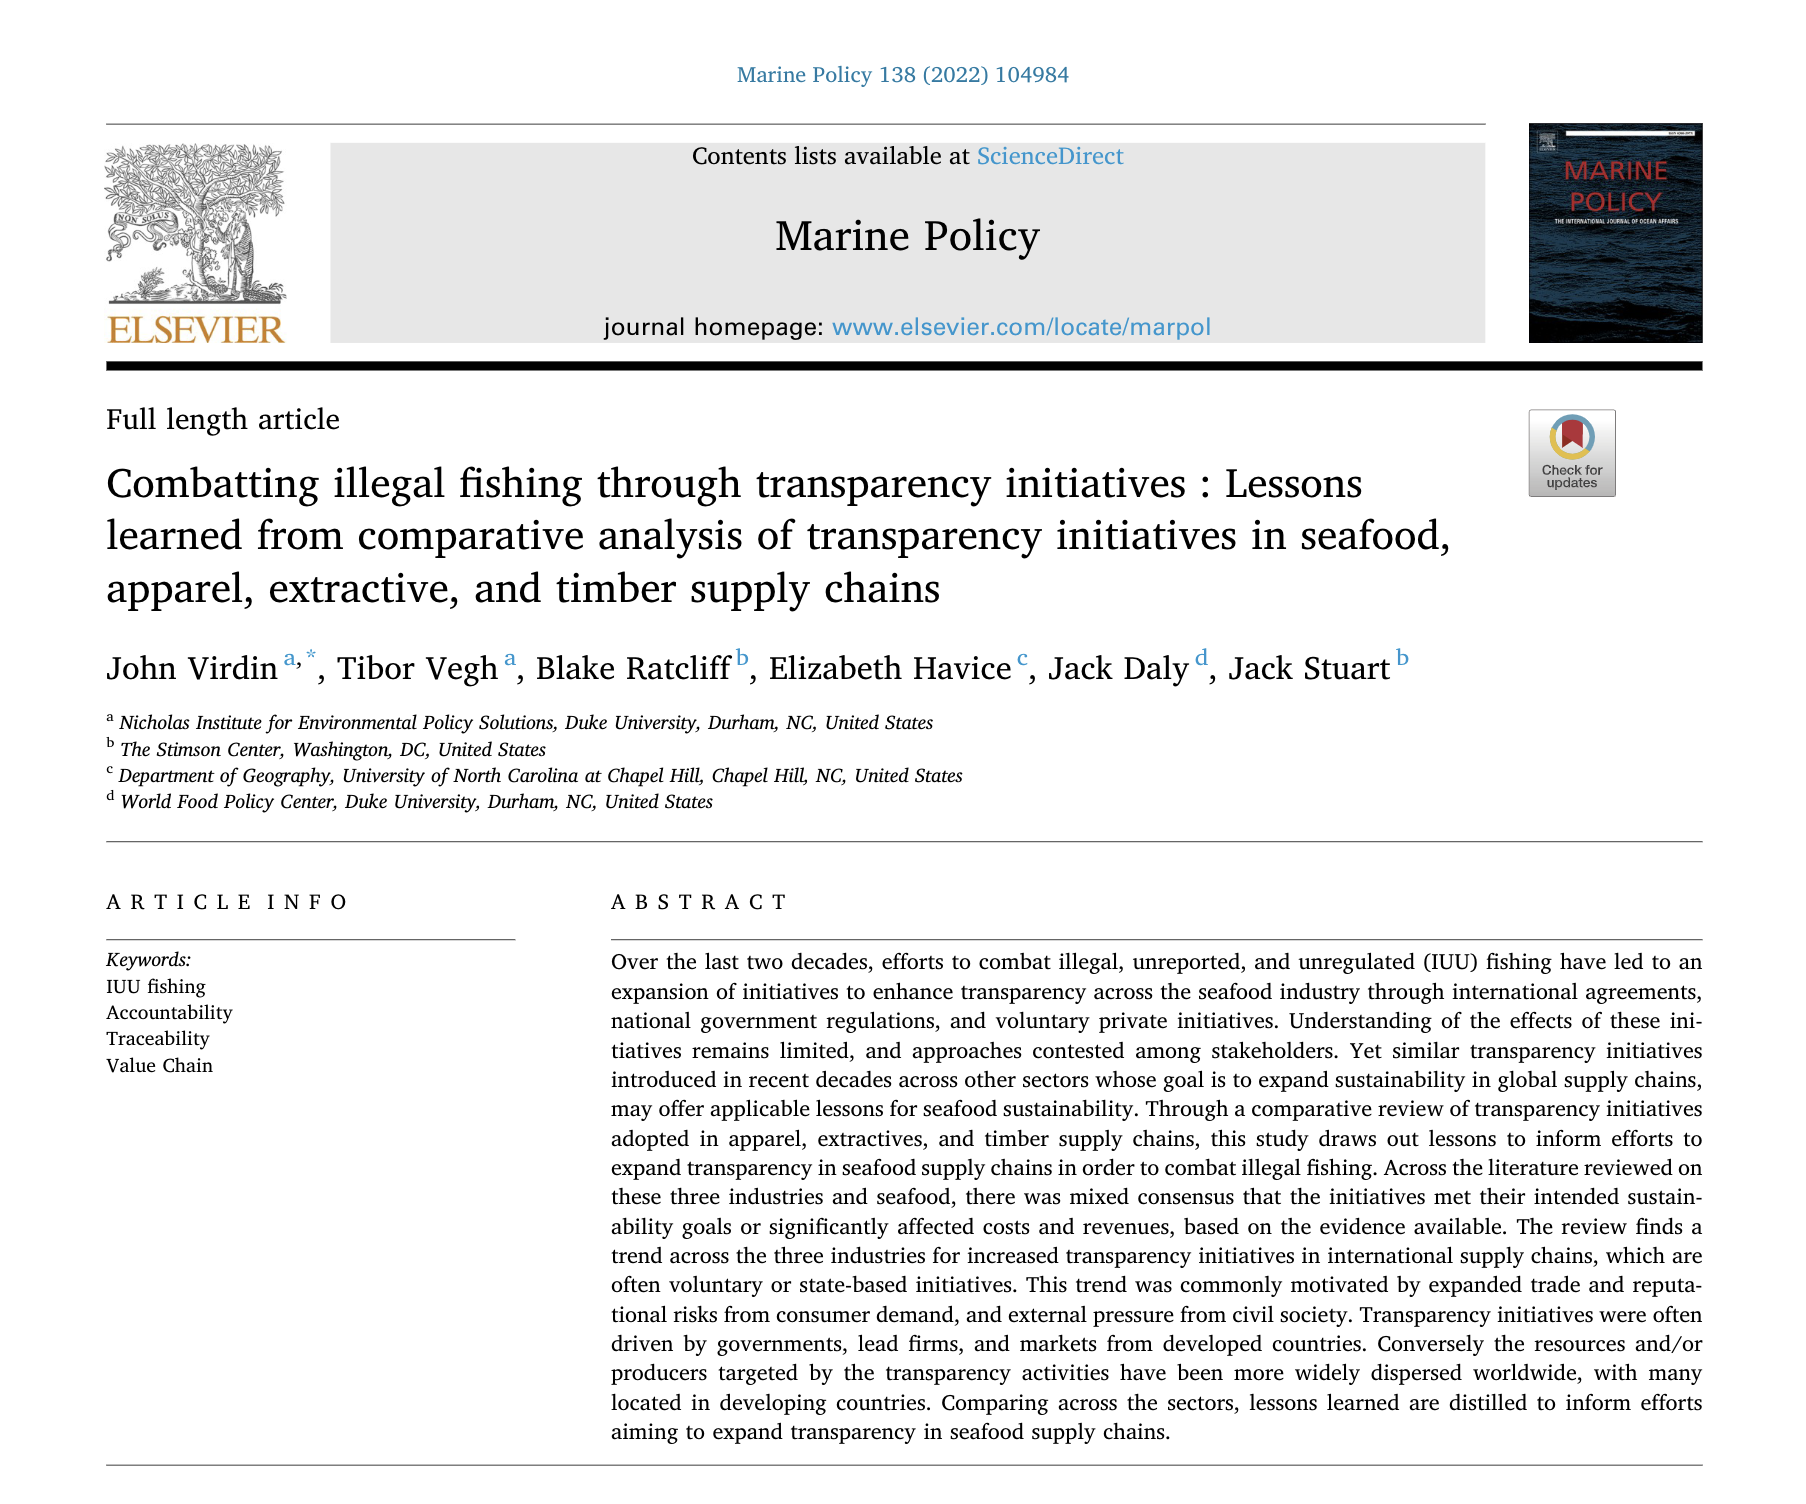 Combatting illegal fishing through transparency initiatives : Lessons learned from comparative analysis of transparency